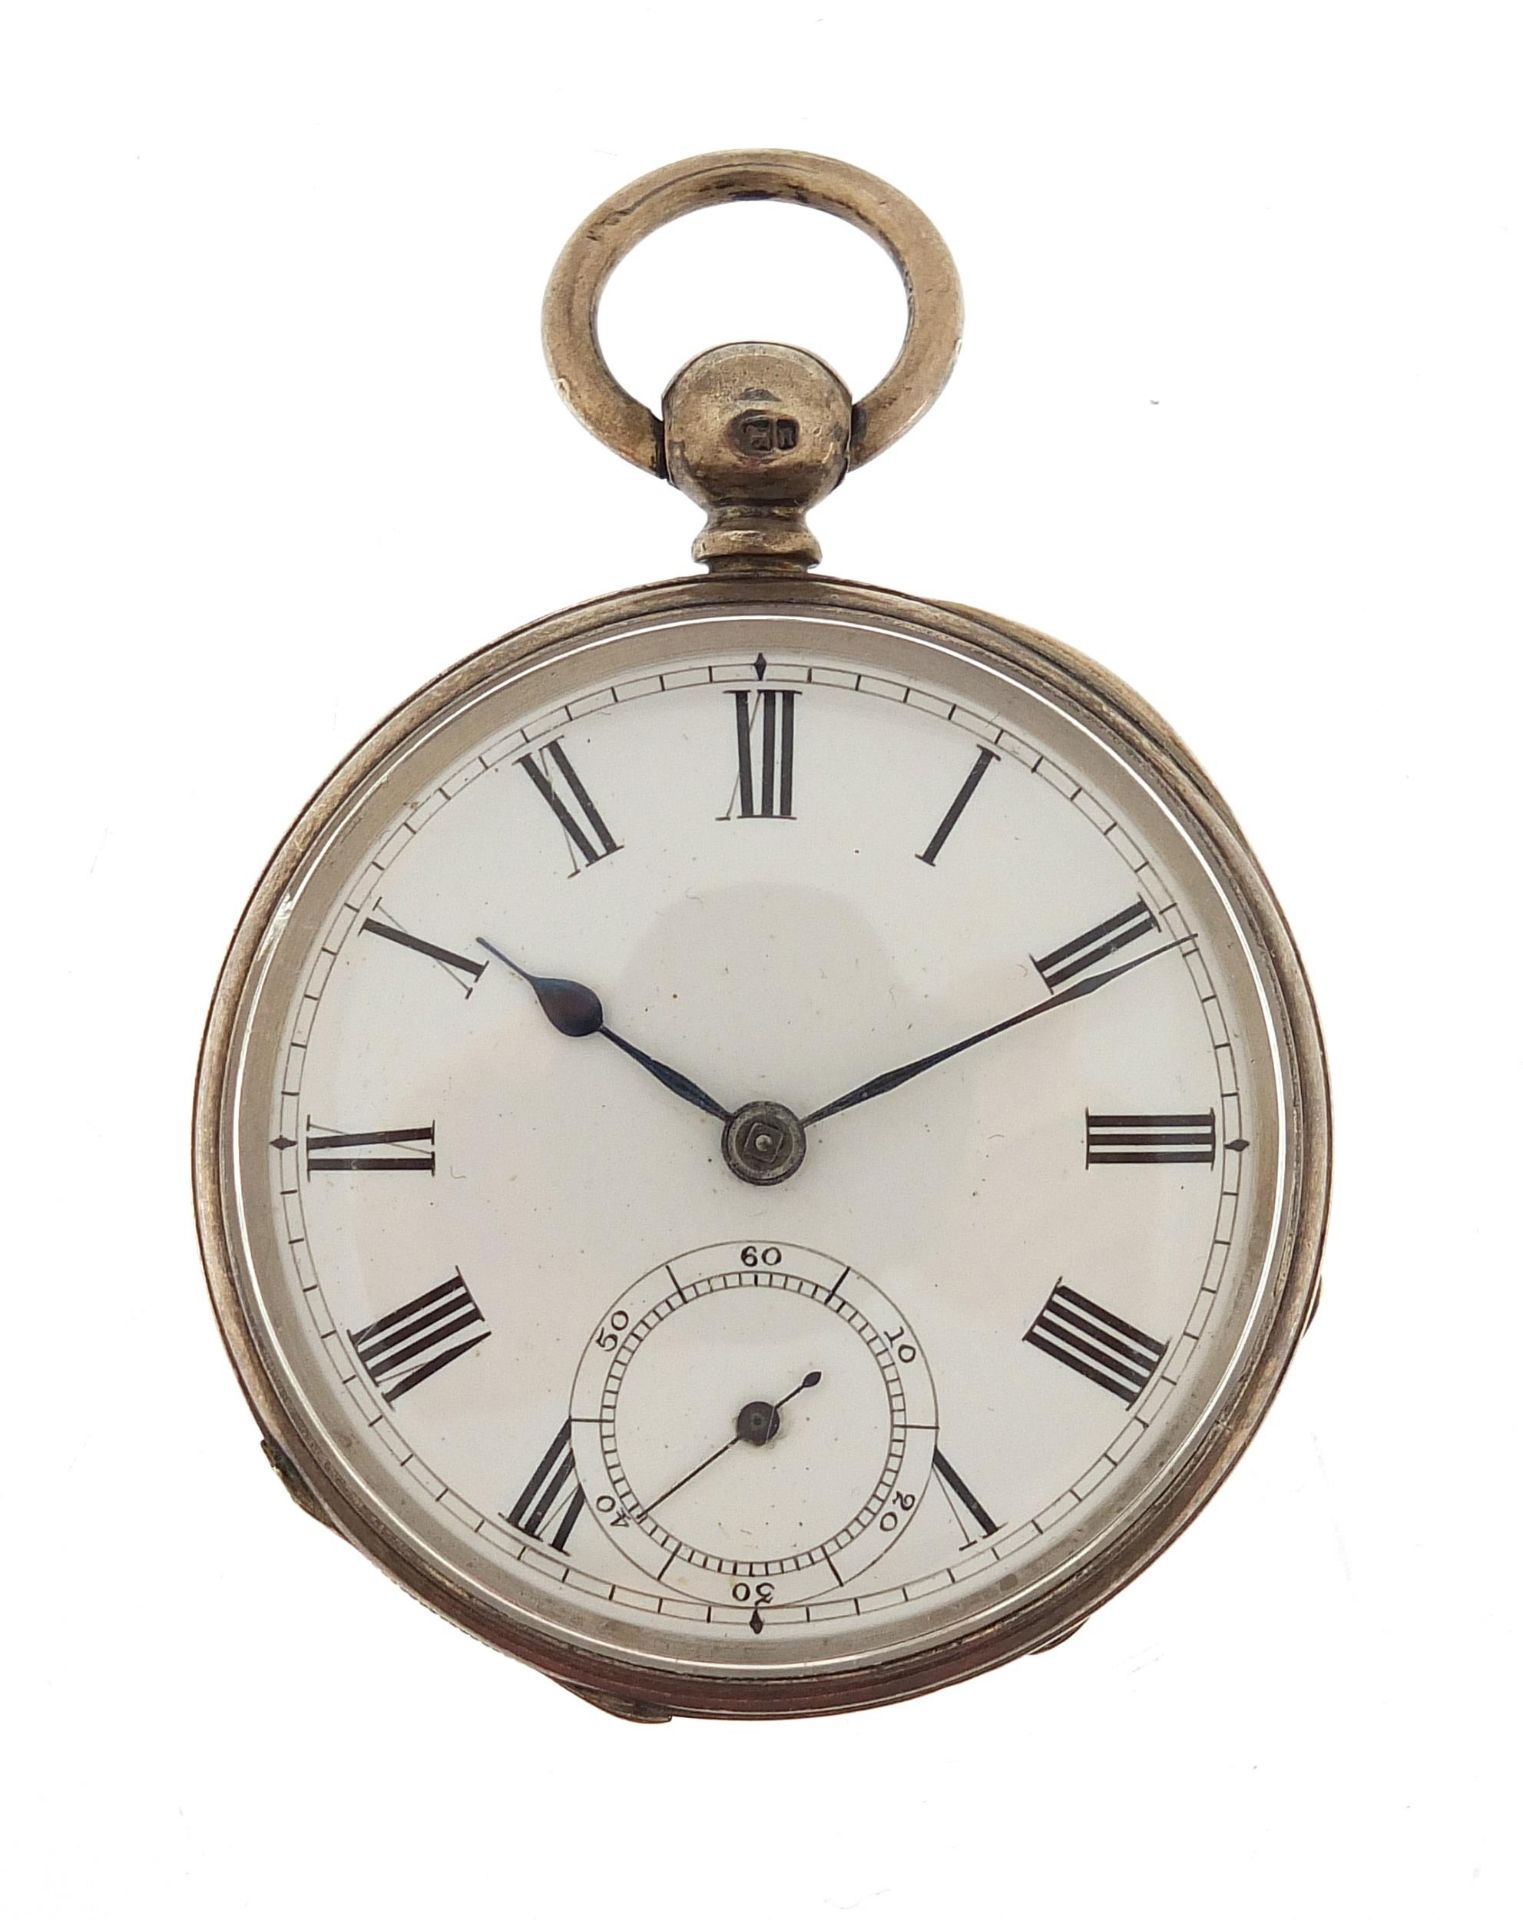 Waltham, gentlemen's silver open face pocket watch with enamelled dial, the movement numbered